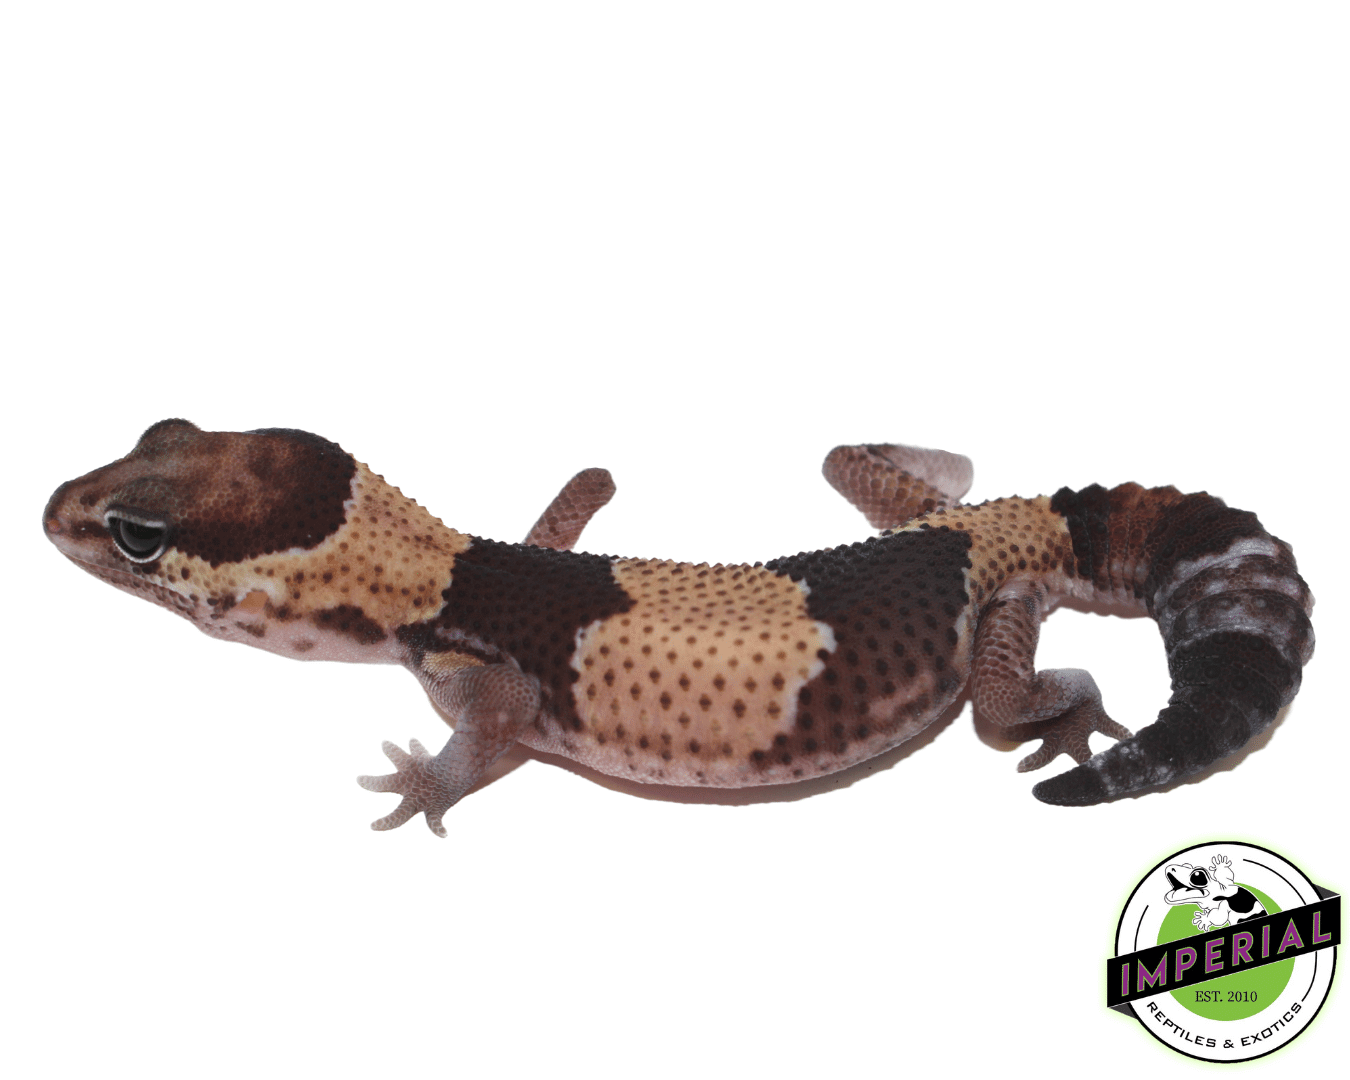 Tangerine ph Amel Oreo African Fat Tail gecko for sale, buy reptiles online